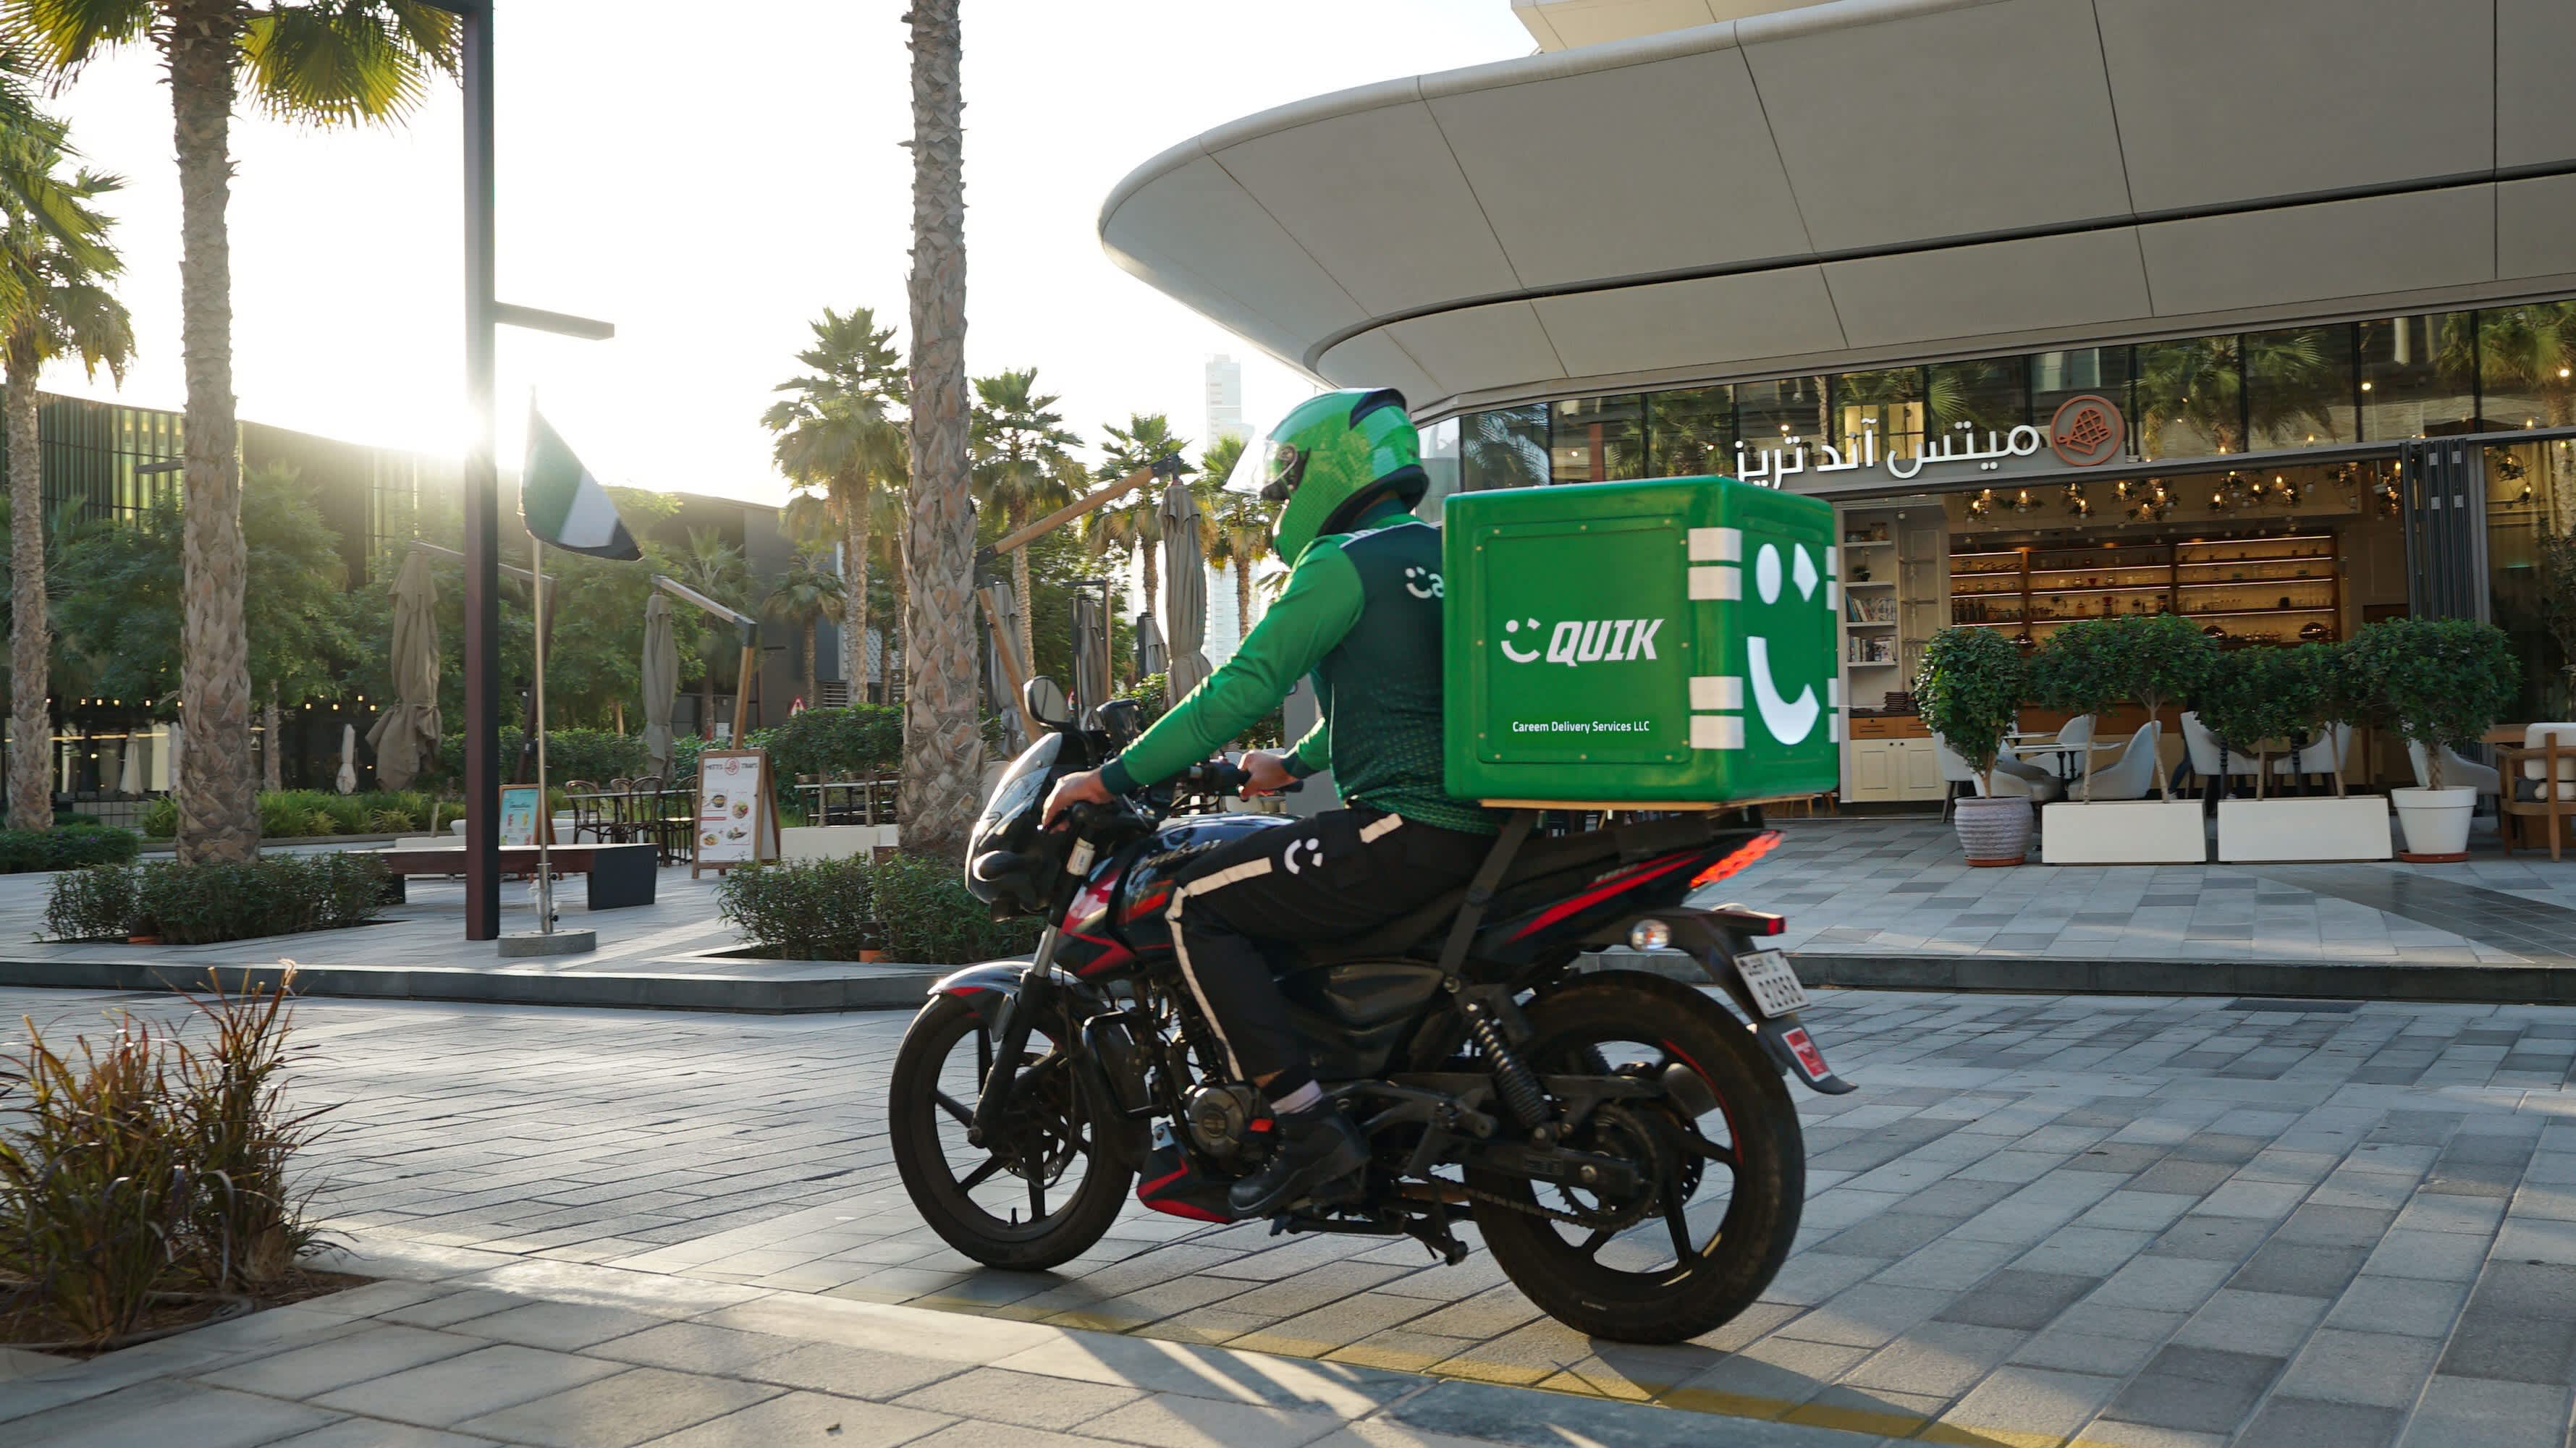 Uber-owned Careem gets in on the surging rapid grocery delivery market with UAE launch